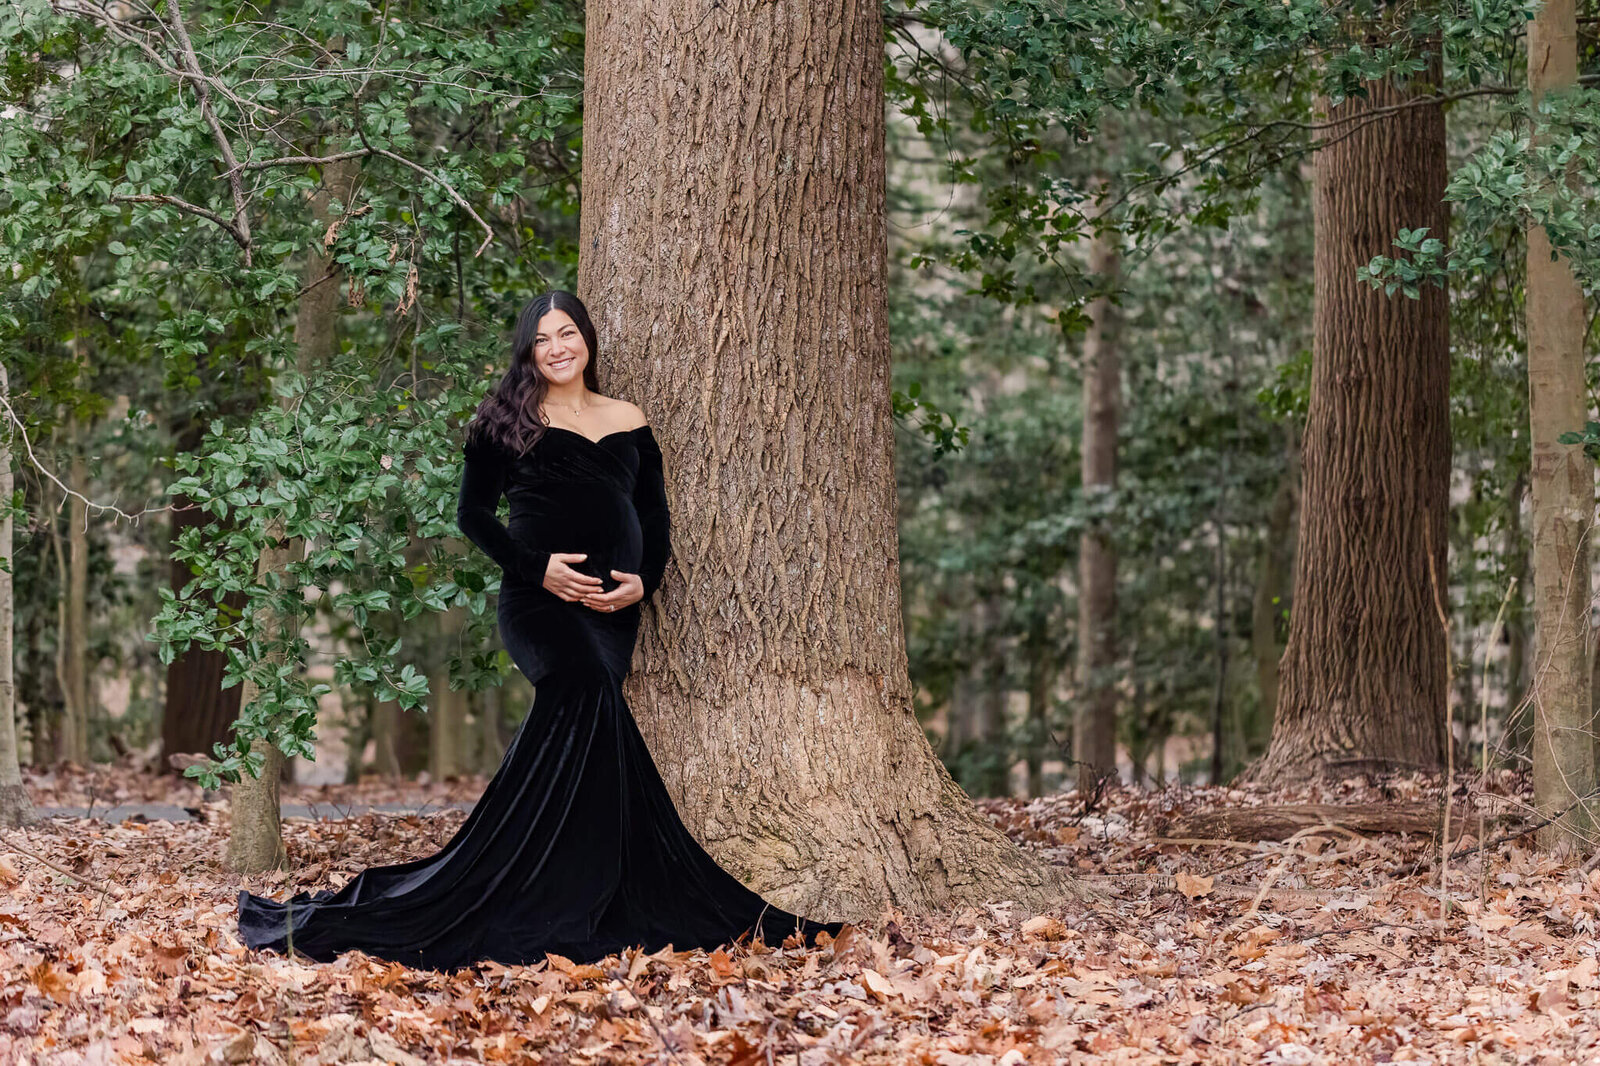 A pregnant woman in a black dress leaning against a tree at a park.